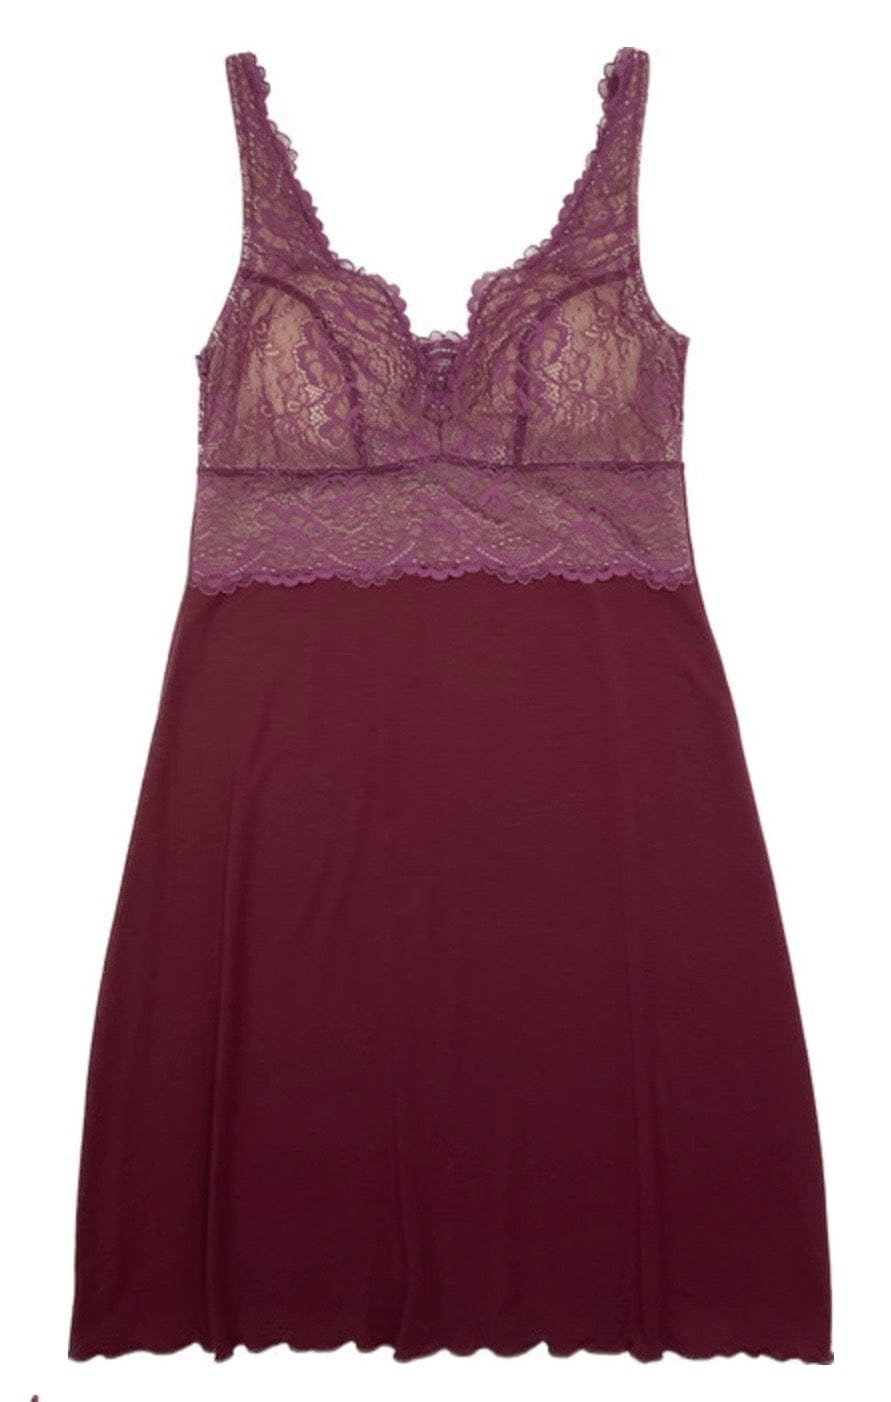 Samantha Chang Chemise Maroon with Rosewood Lace / S Samantha Chang Home Apparel Built Up Chemise